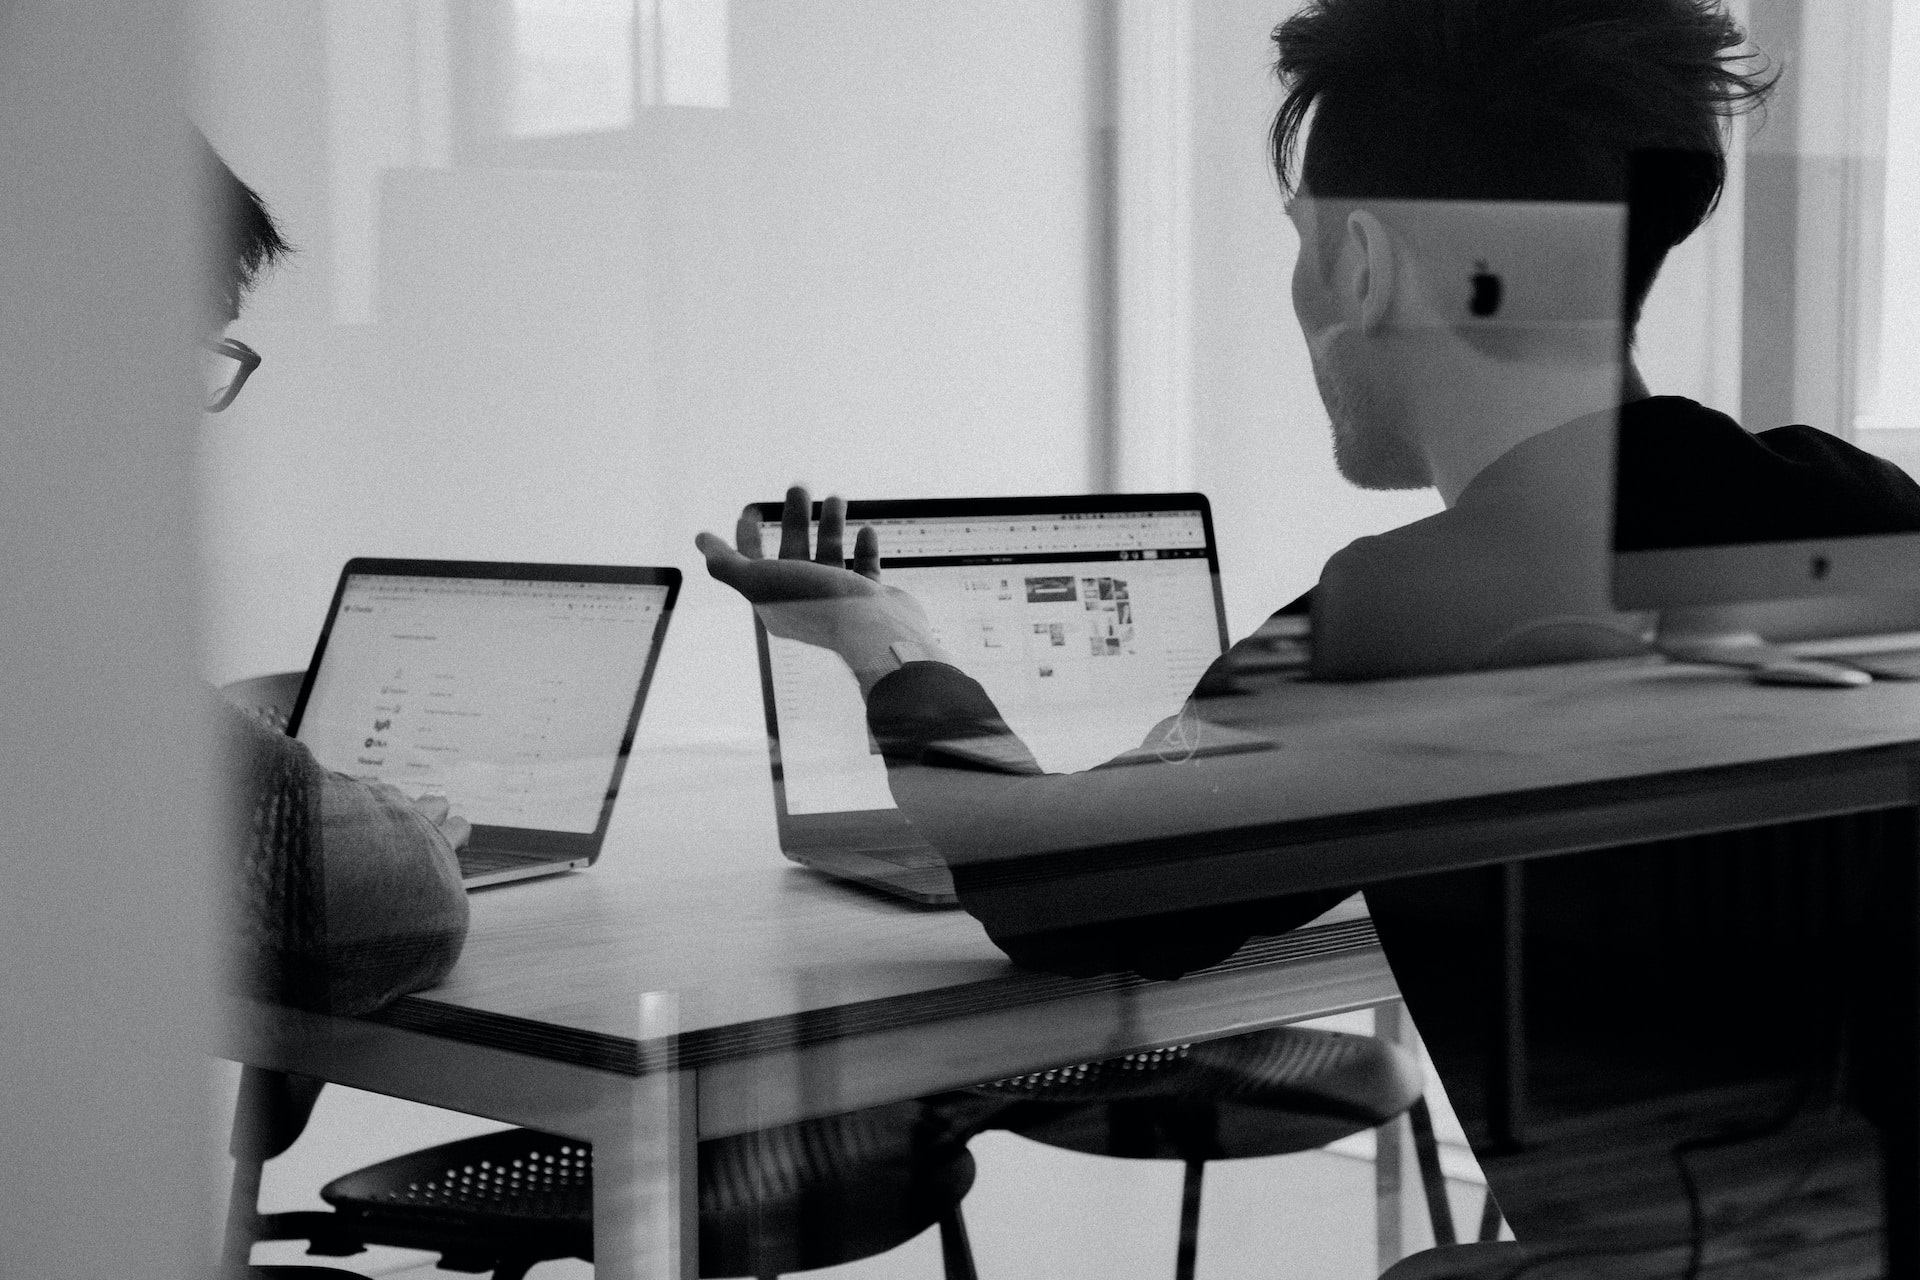 Black-and-white photo of two people, seen from behind, working on Apple laptops.